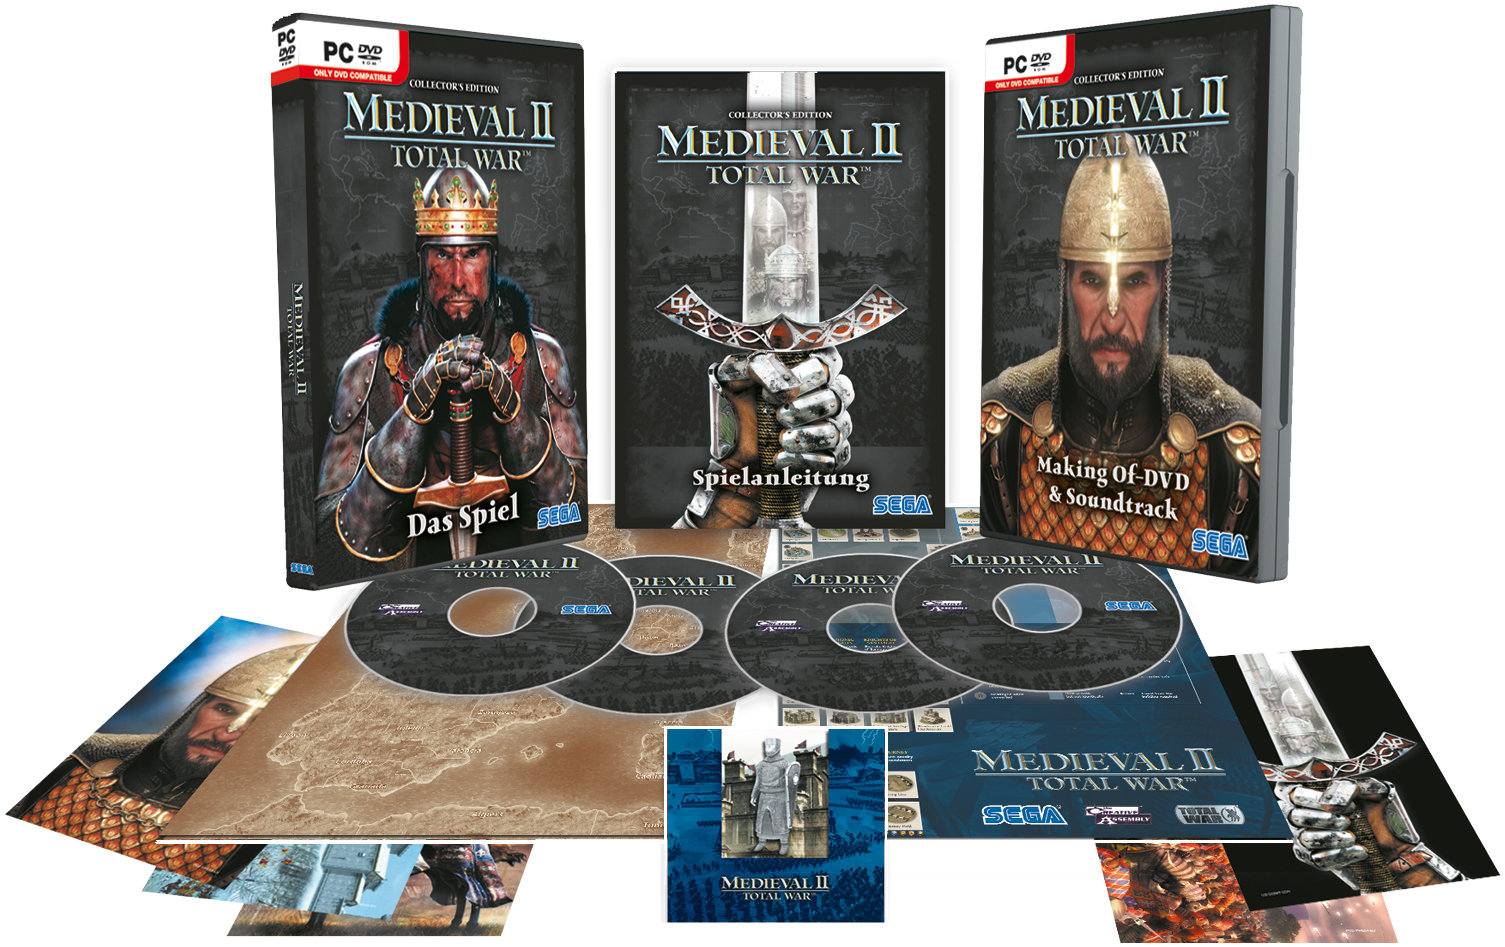 Medieval II Collector's Edition